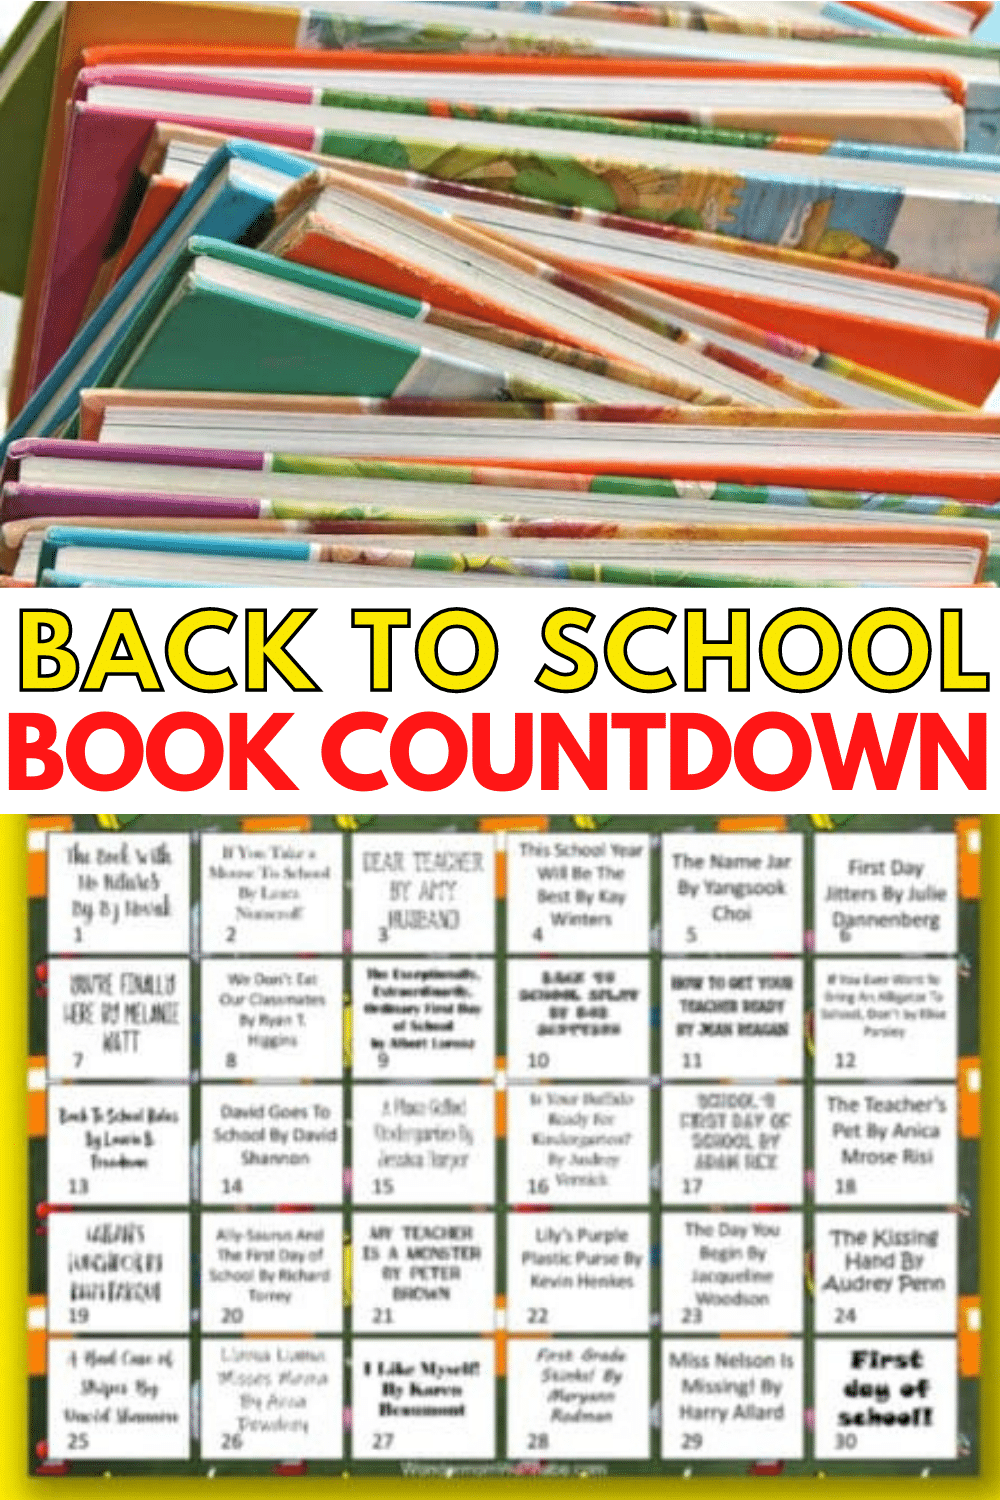 This printable back to school book countdown calendar is perfect for children starting kindergarten. Reading books about school will make them feel at ease. #reading #printables #backtoschool via @wondermomwannab